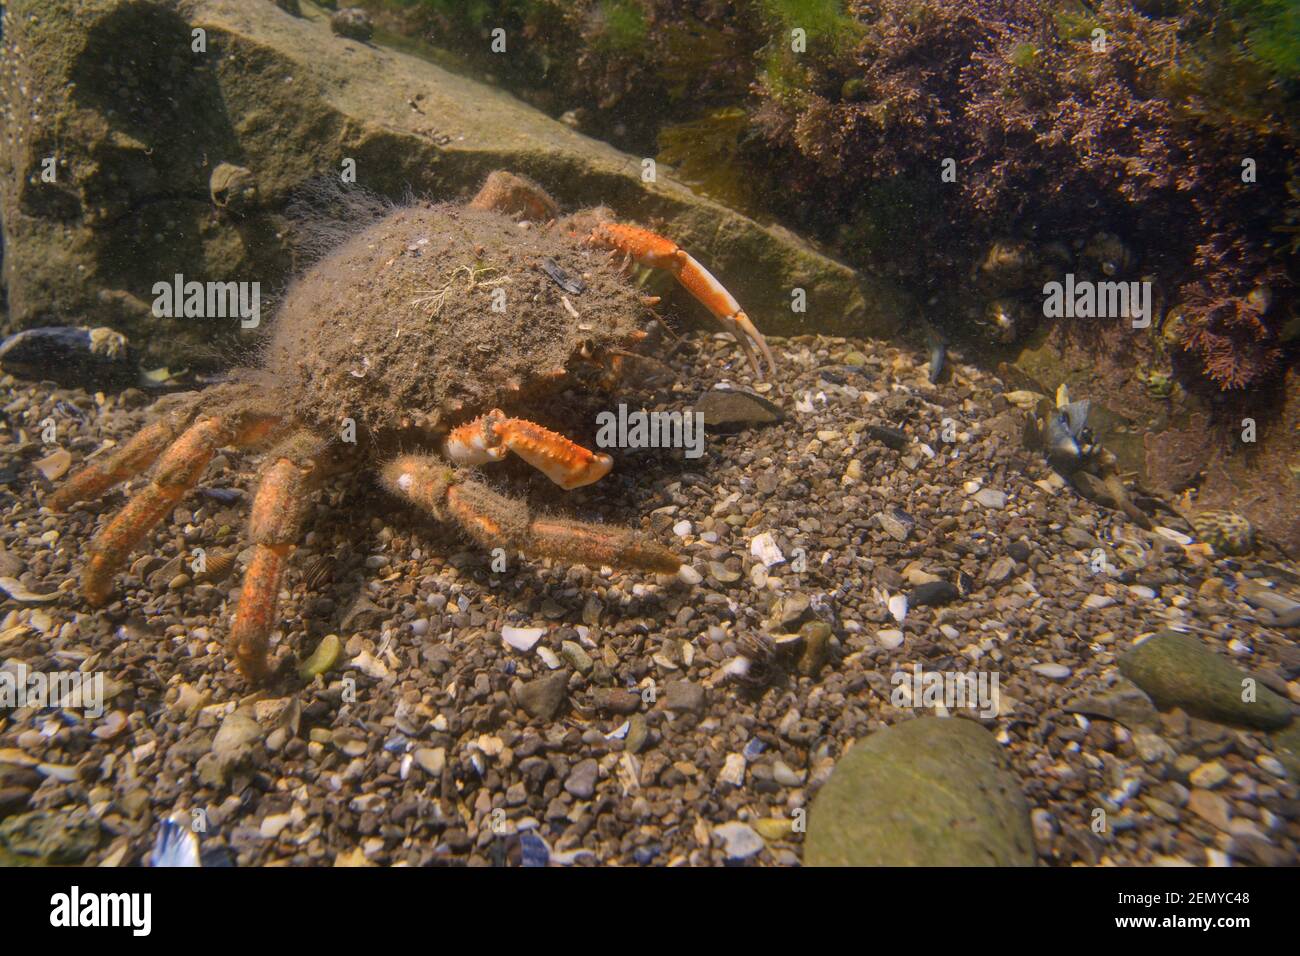 Female Common spider crab / Spiny spider crab (Maja brachydactyla / Maja squinado) walking in a rockpool low on the shore, Rhossili, Wales, UK. Stock Photo